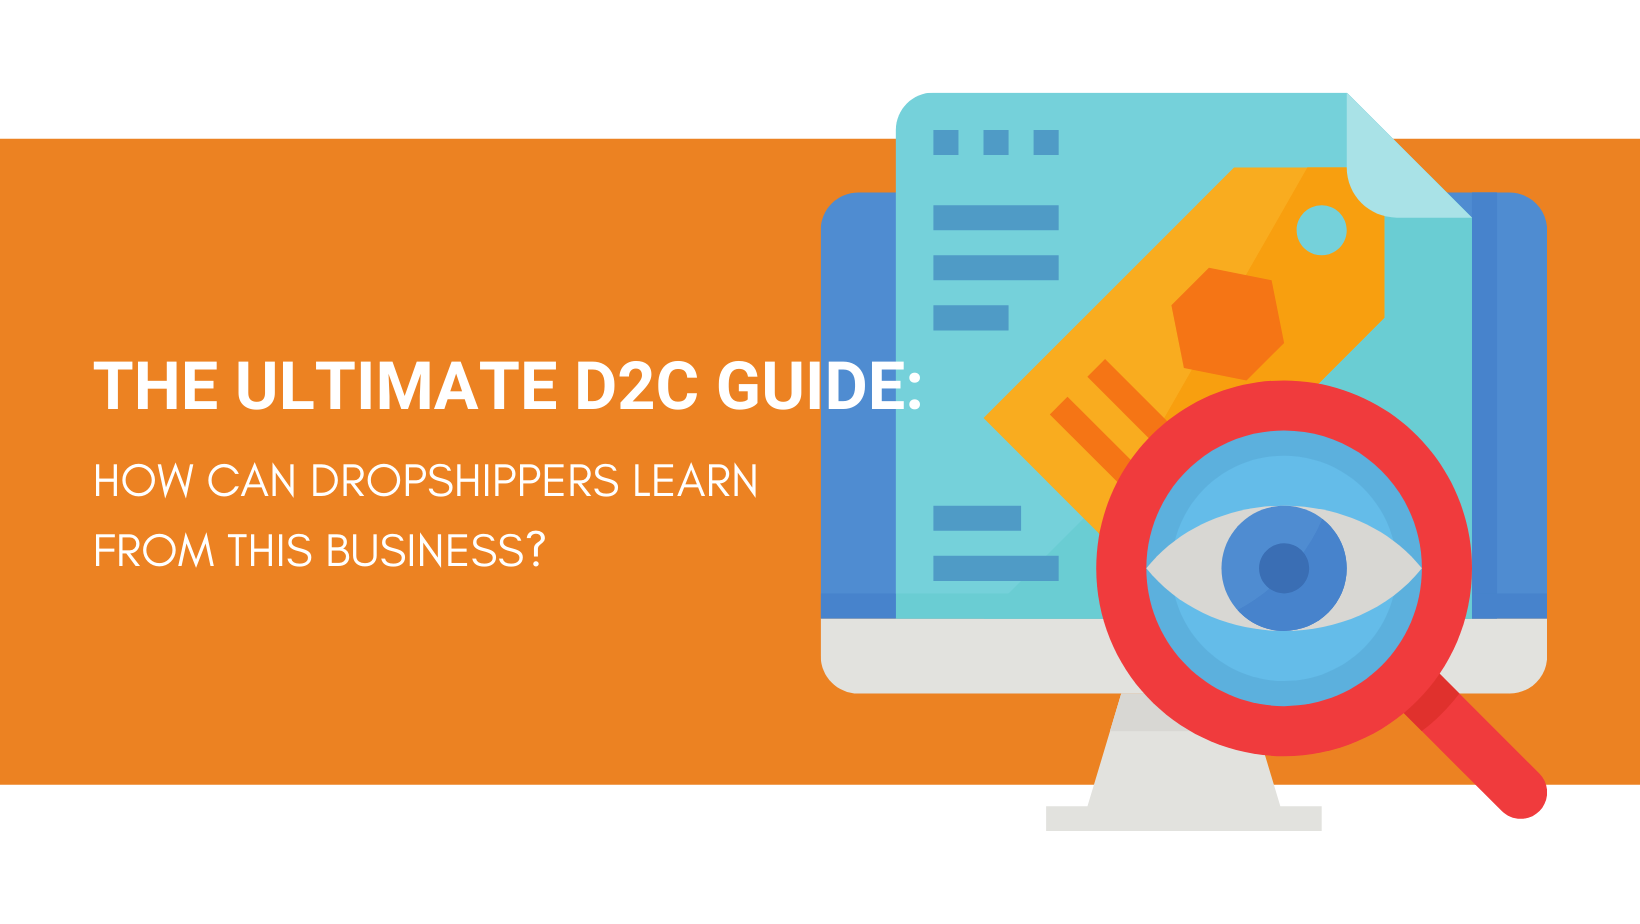 The Ultimate D2C Guide: How Can Dropshippers Learn From This Business?